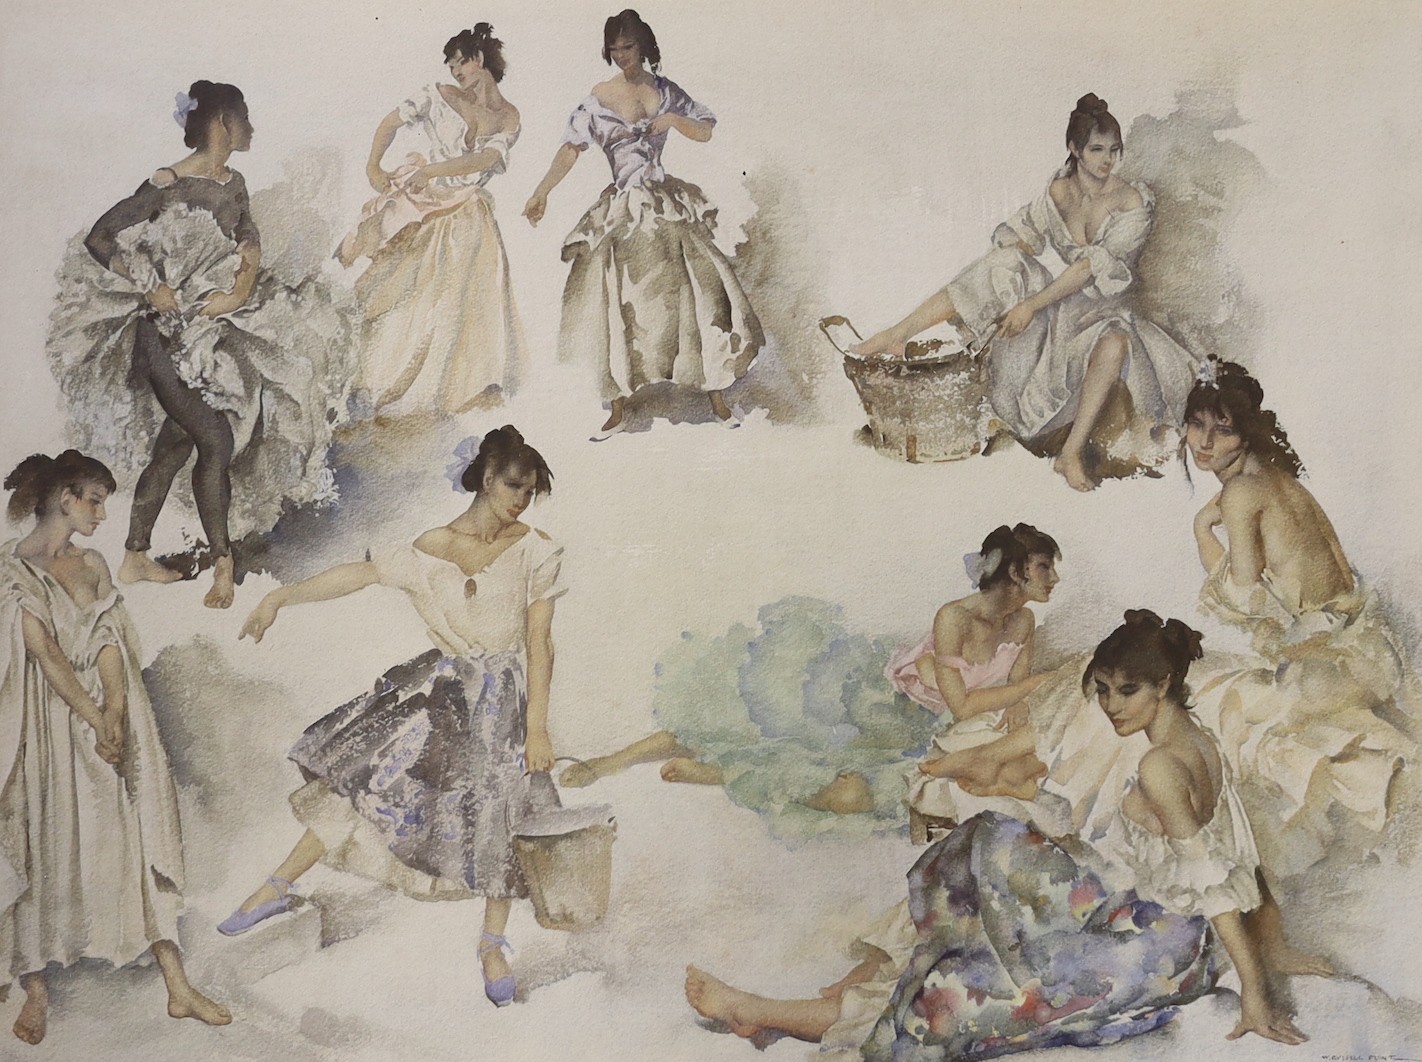 Sir William Russell Flint (1880-1969), two signed limited edition prints, Studies of models and Figures in a granary, both signed, largest 48 x 63cm